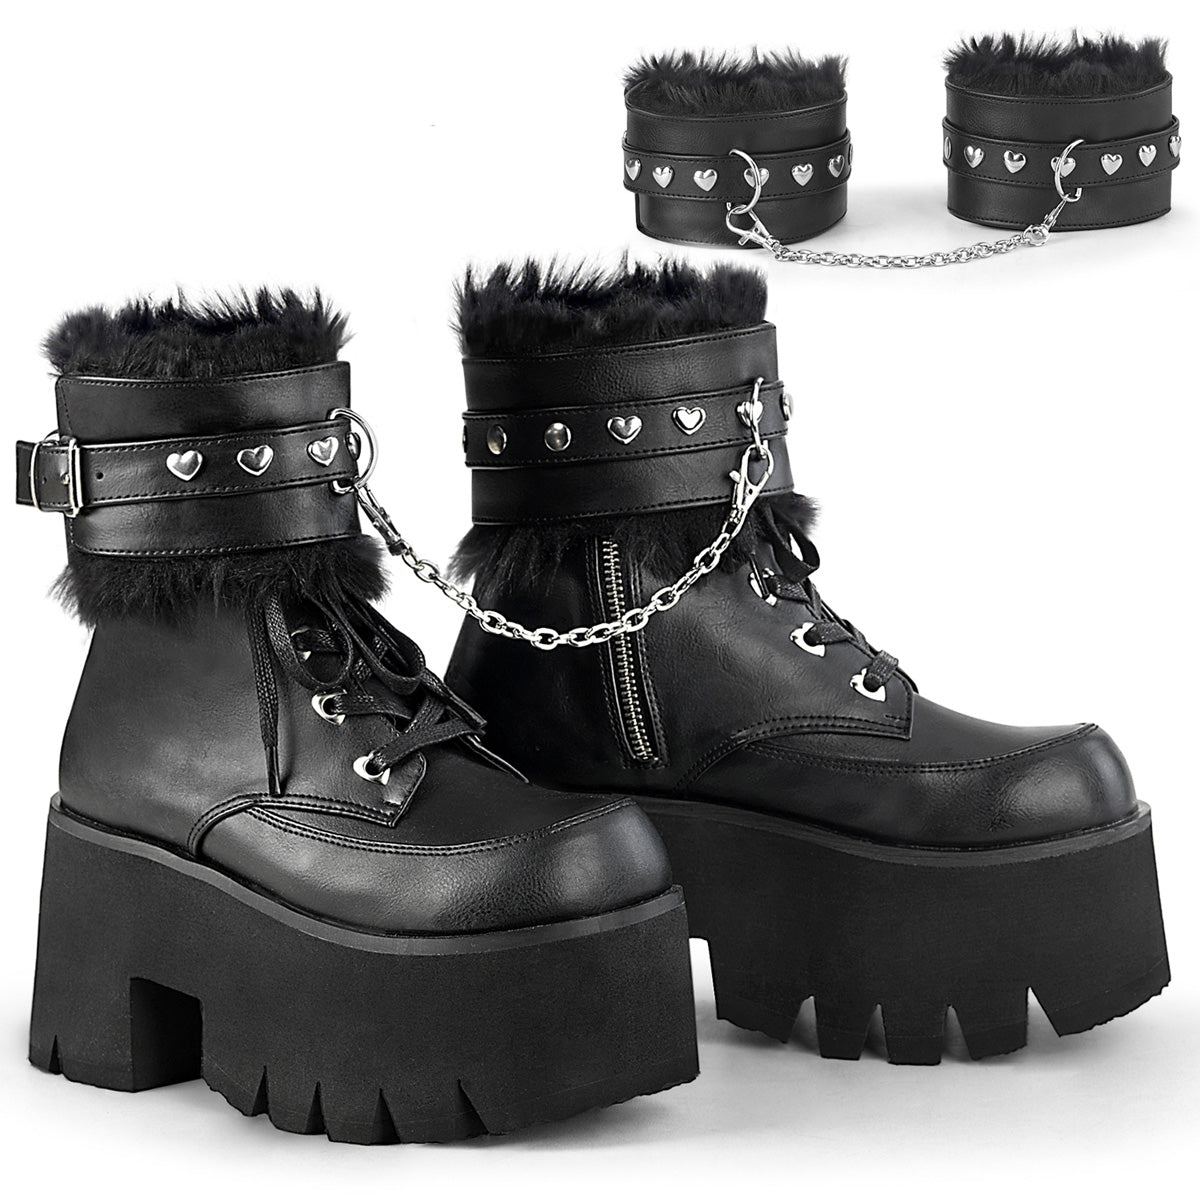 Black ashes chunky platform leatherette, side zip ankle boot with cuffs option, cuffs shown off boot in upper right corner.